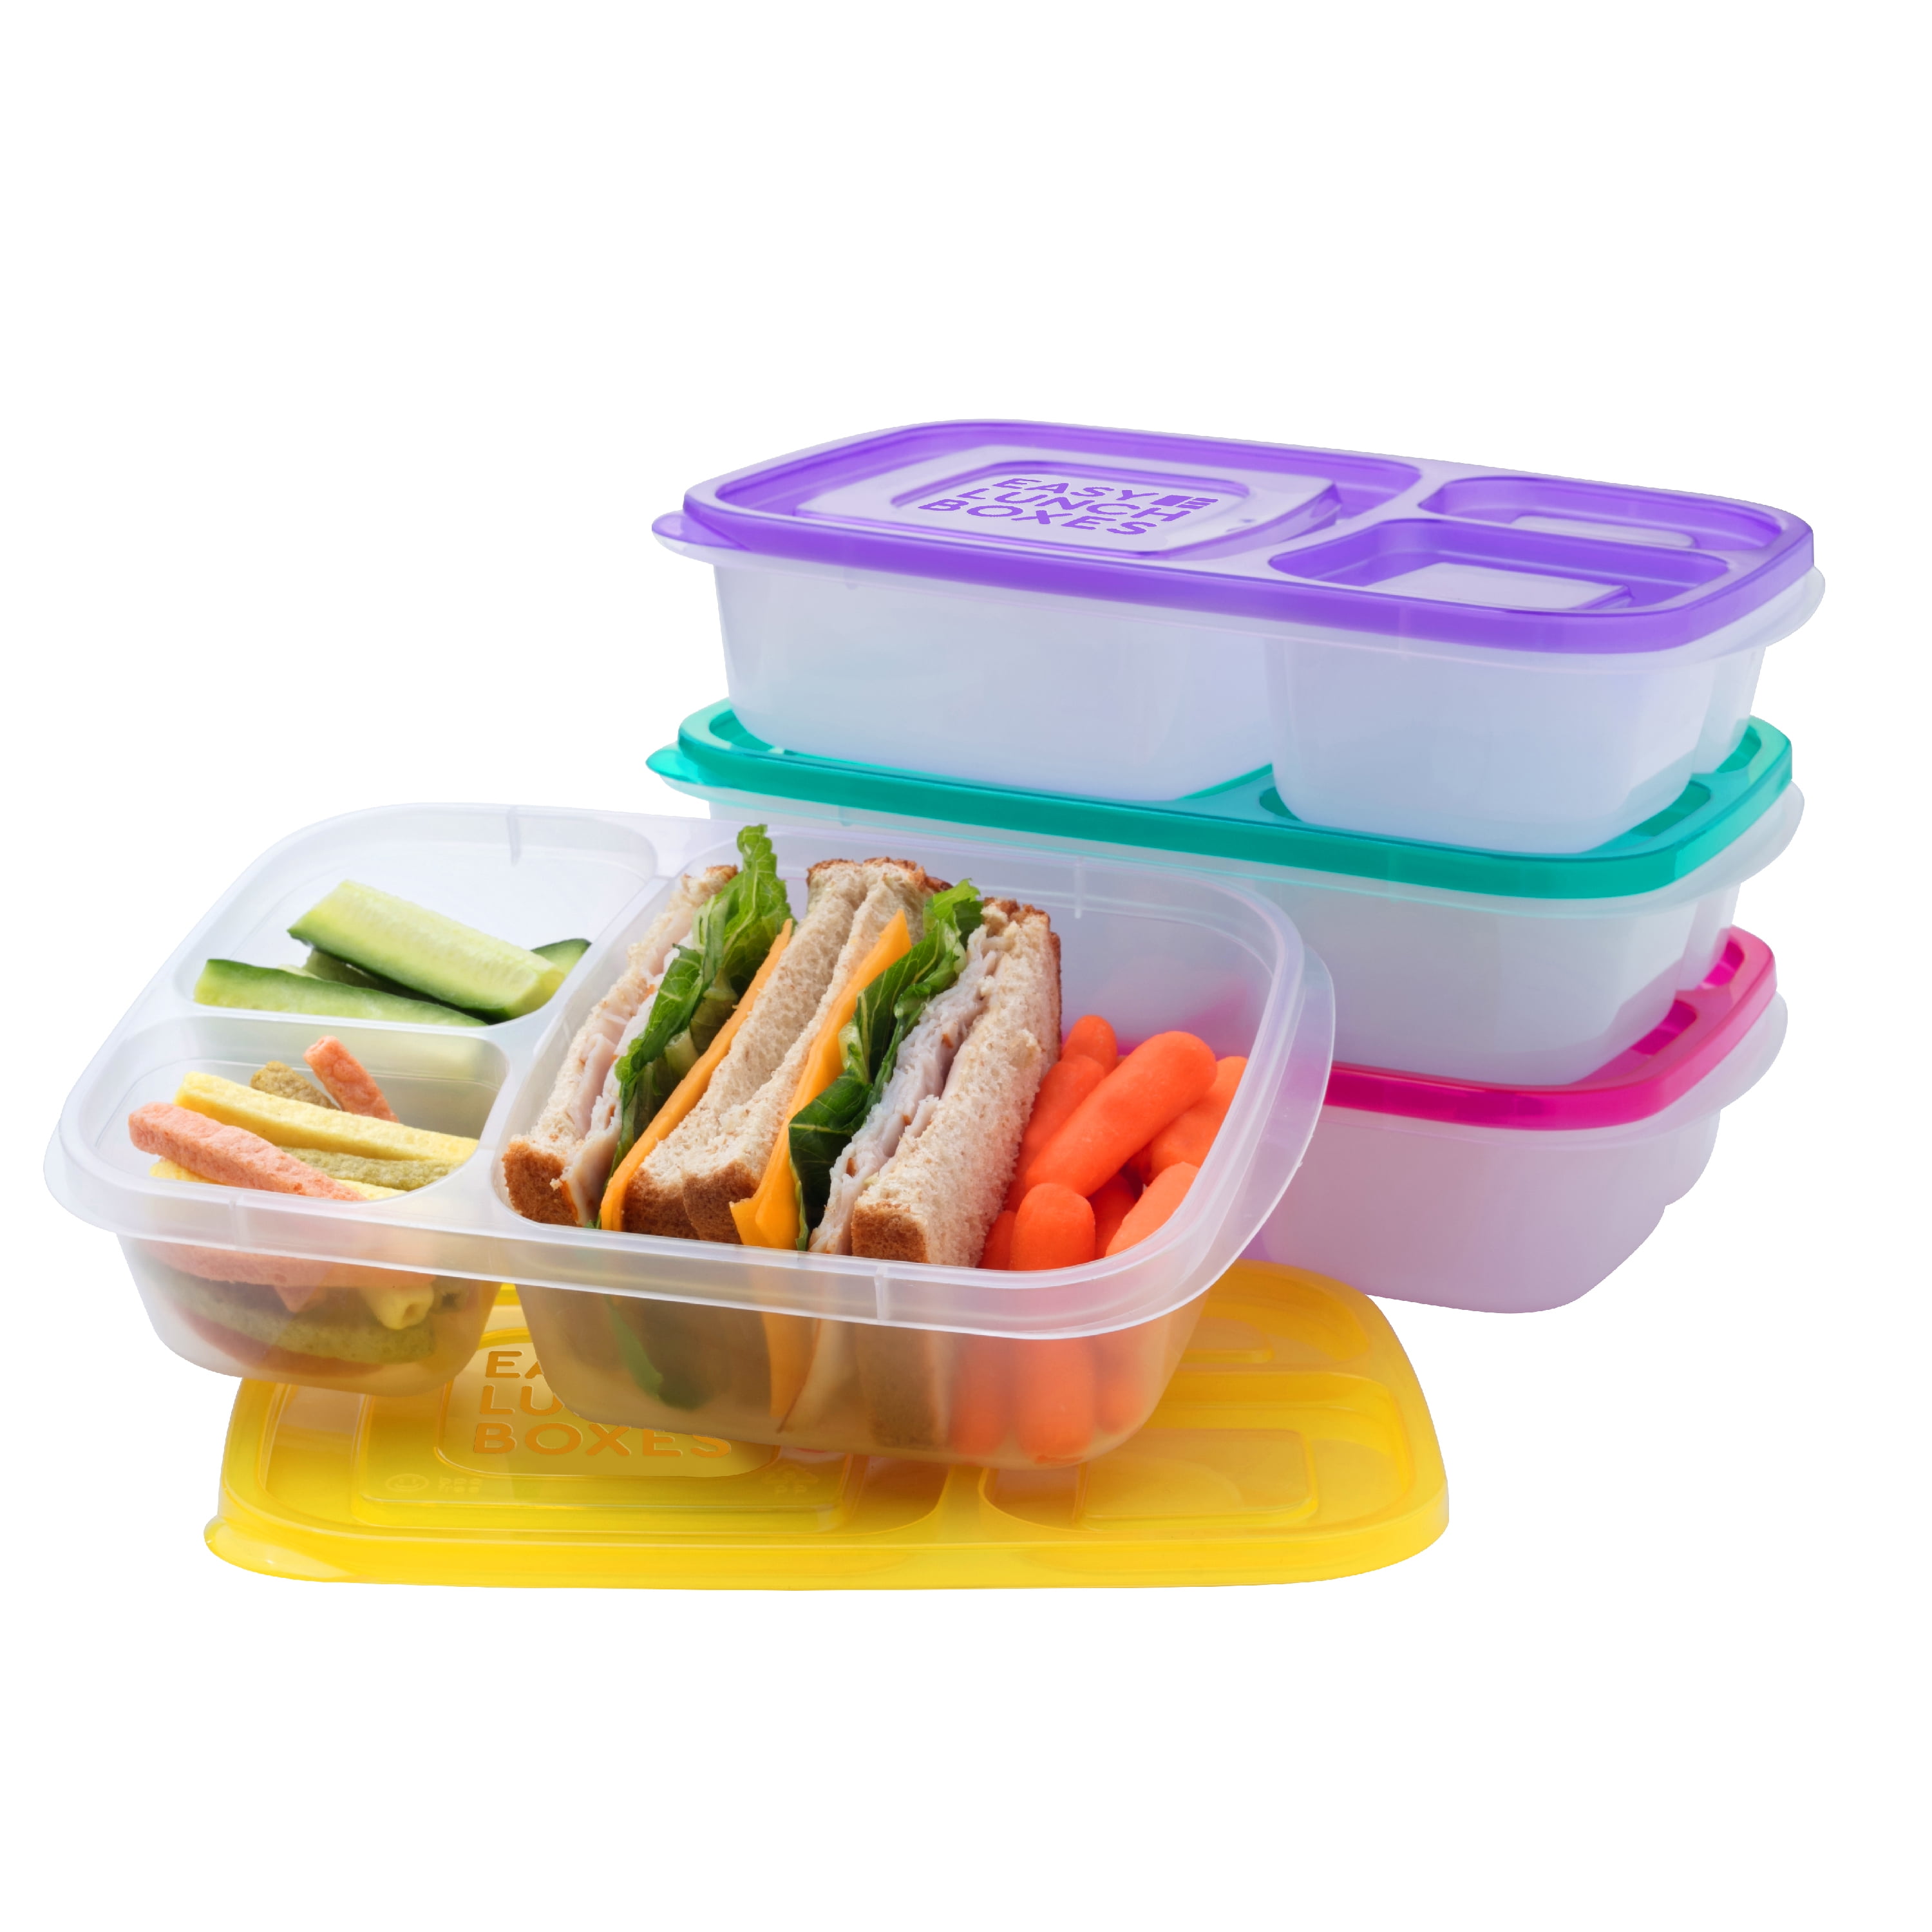 Okllen 3 Pack Bento Lunch Boxes with Spoon and 4 Compartment, Plastic Meal  Prep Containers with Lids…See more Okllen 3 Pack Bento Lunch Boxes with